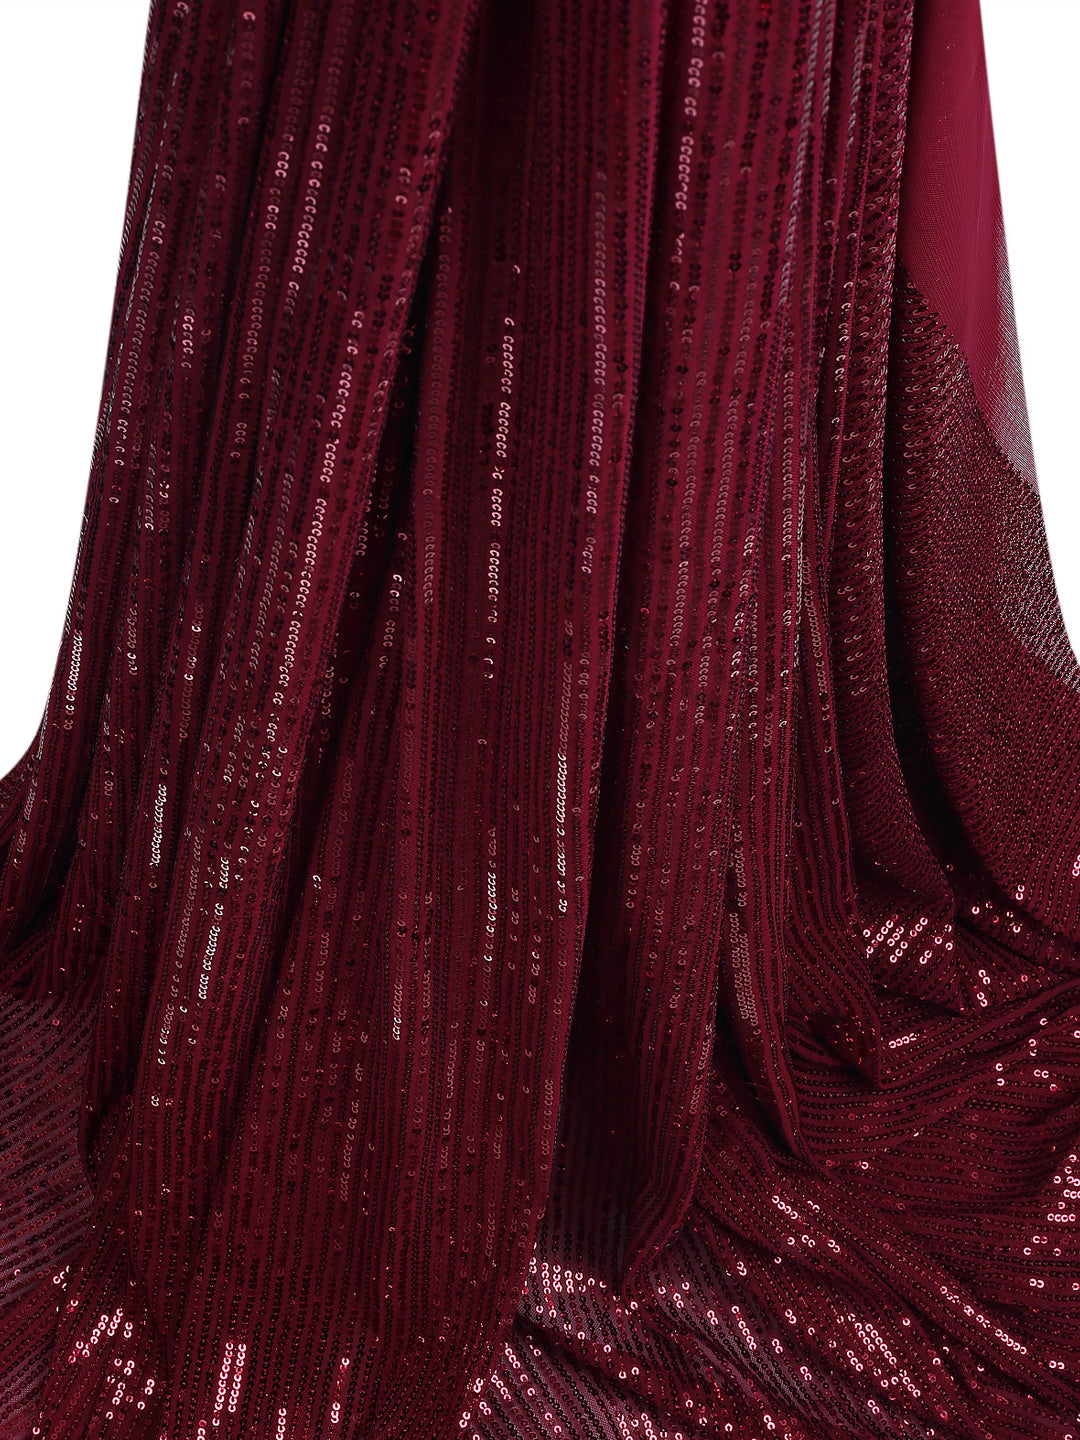 Maroon Stretchable Net Fabric With Sequin